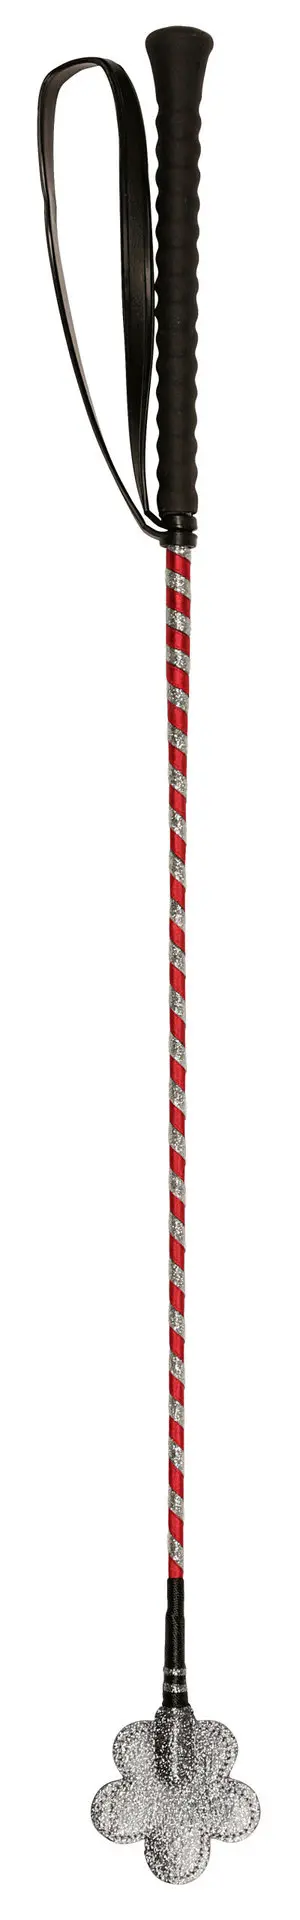 Jumping whip, pink-silver, 65cm